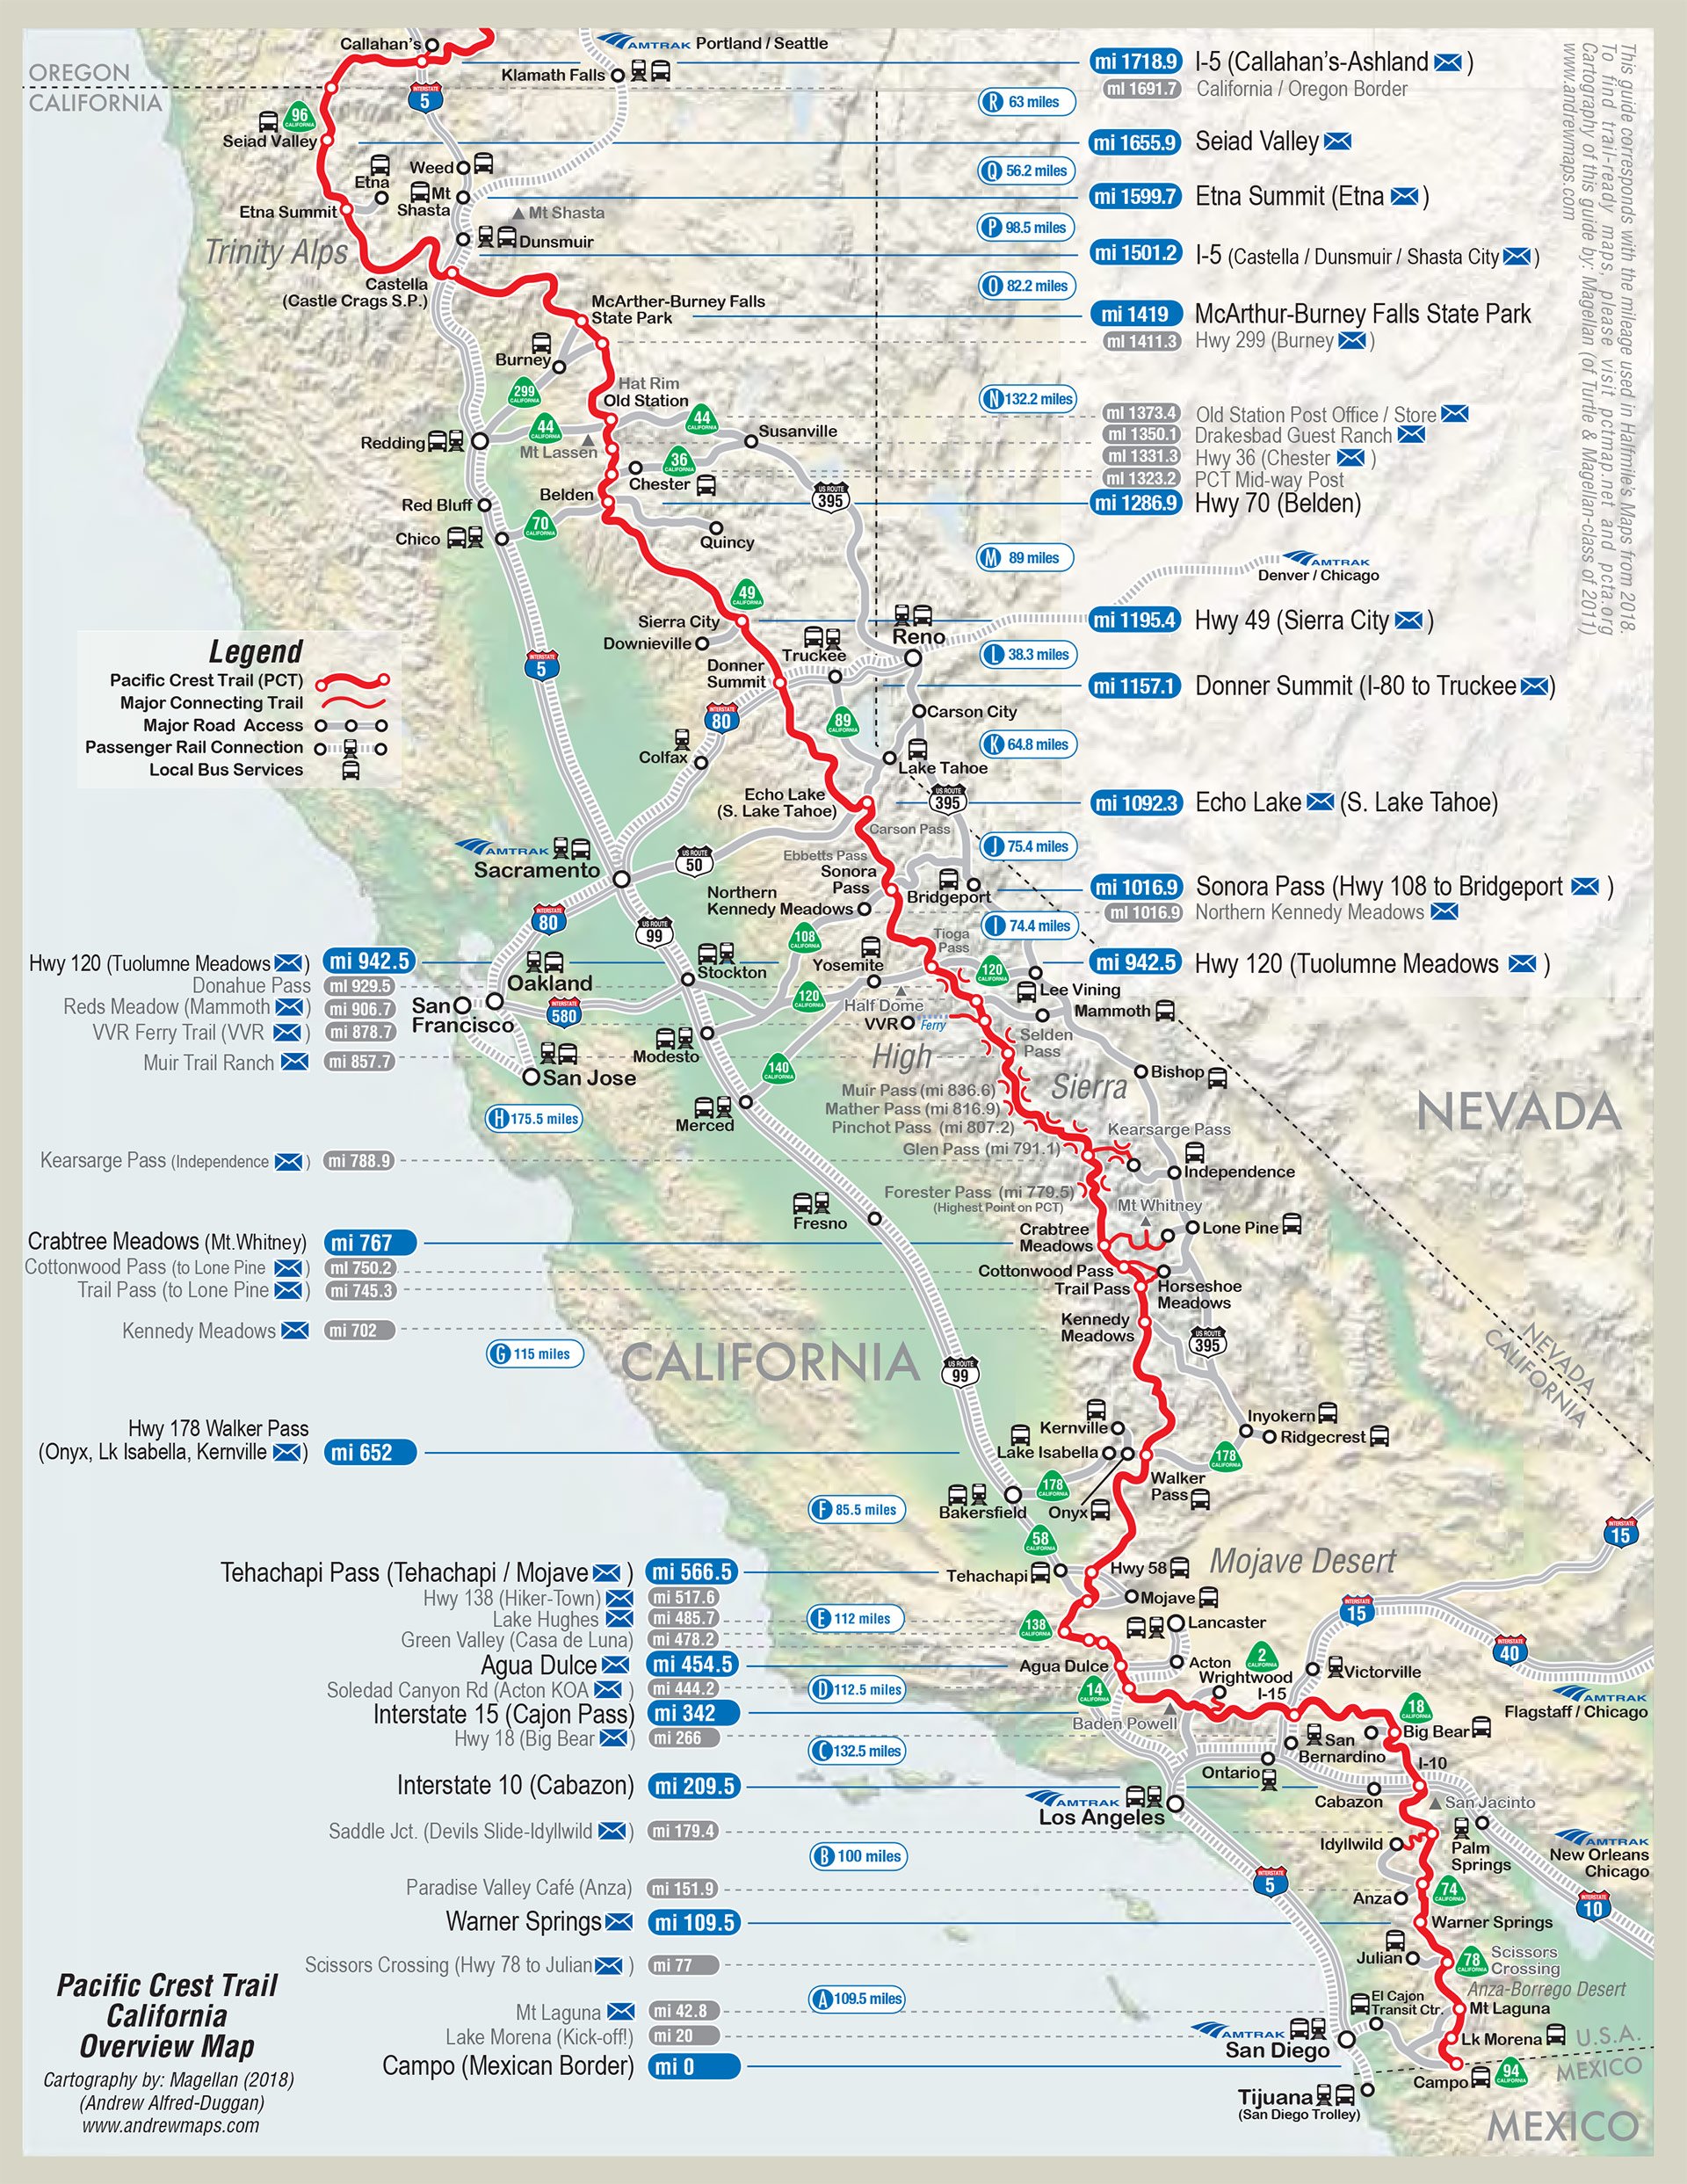 PCT Overview Map On 2 Pages By Magellan Pg1.v.1.2018 ?x48626